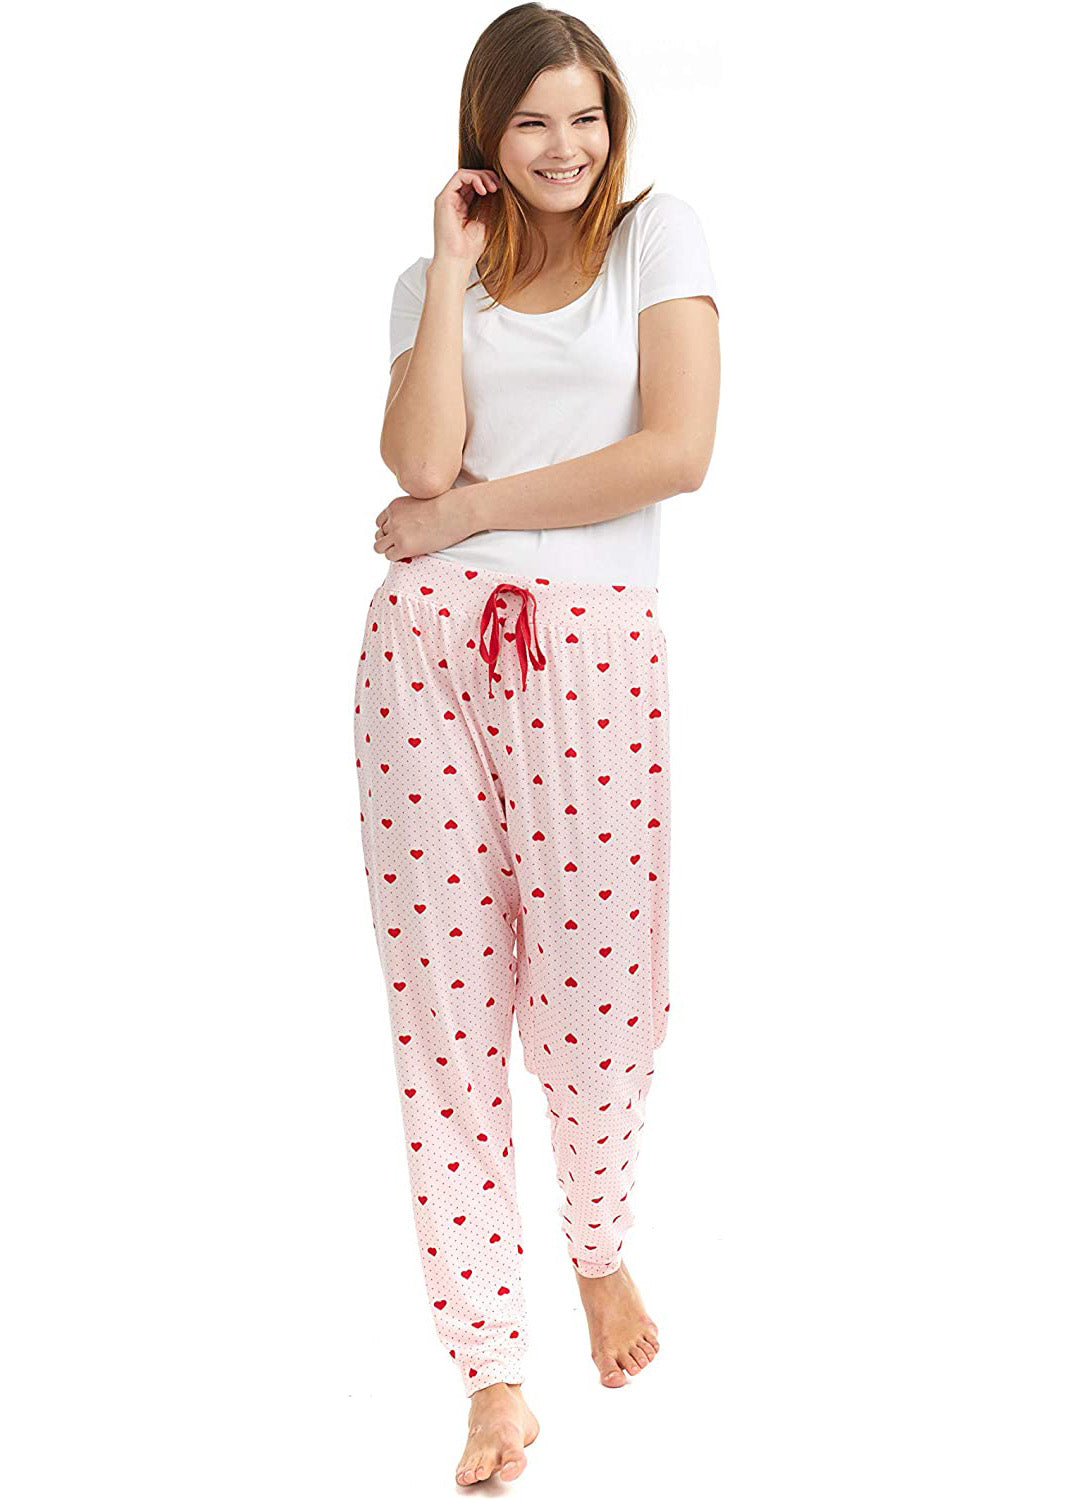 PJ joggers with soft velvety texture, stretch, elastic waistband, drawstring, and stylish ankle cuff. This pattern is small red hearts and dots, on a pink background